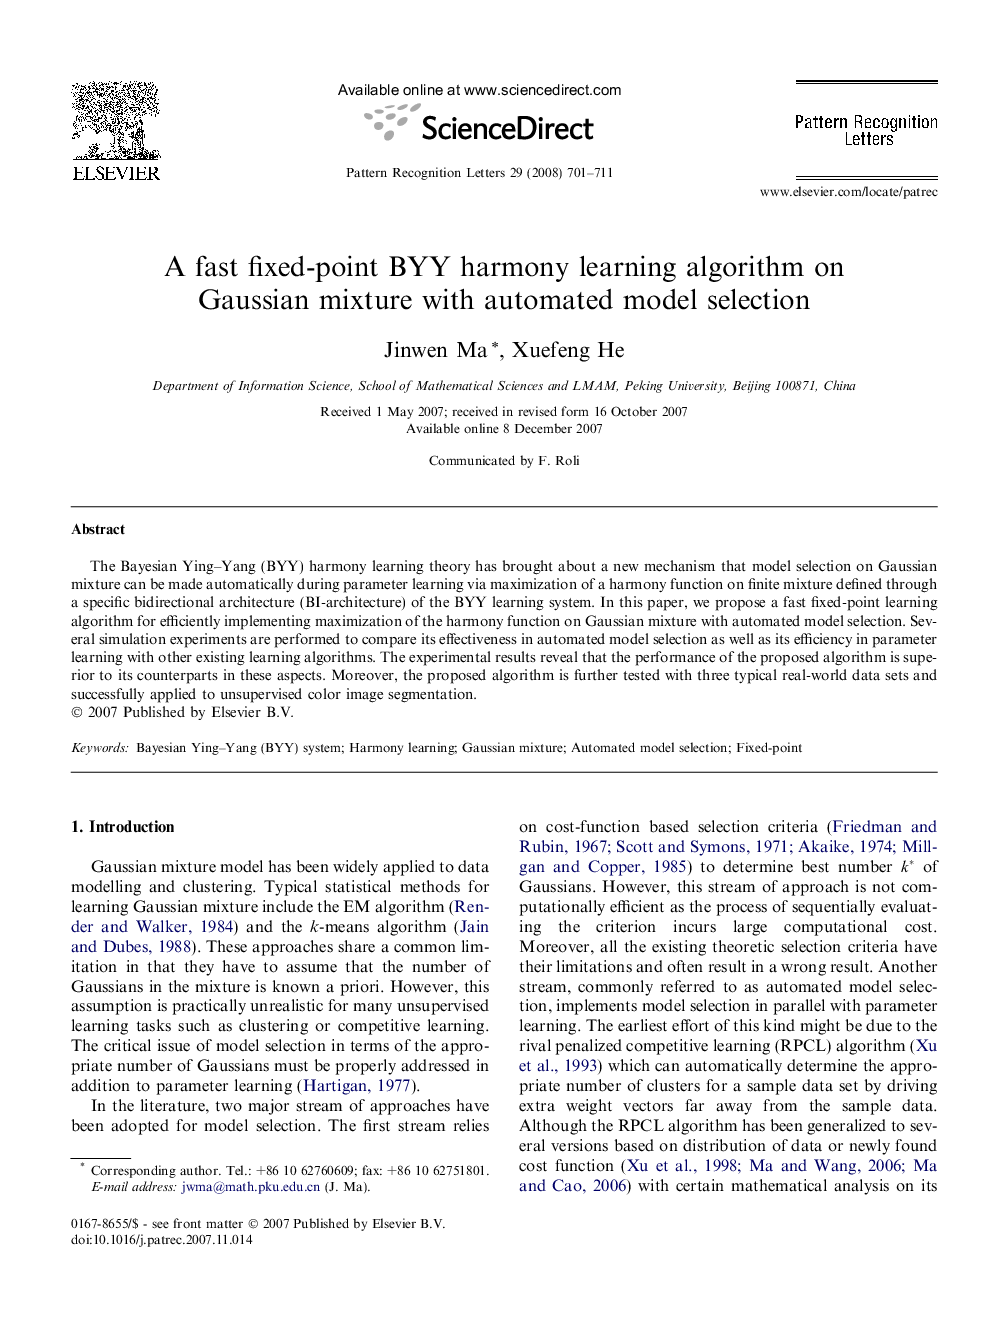 A fast fixed-point BYY harmony learning algorithm on Gaussian mixture with automated model selection